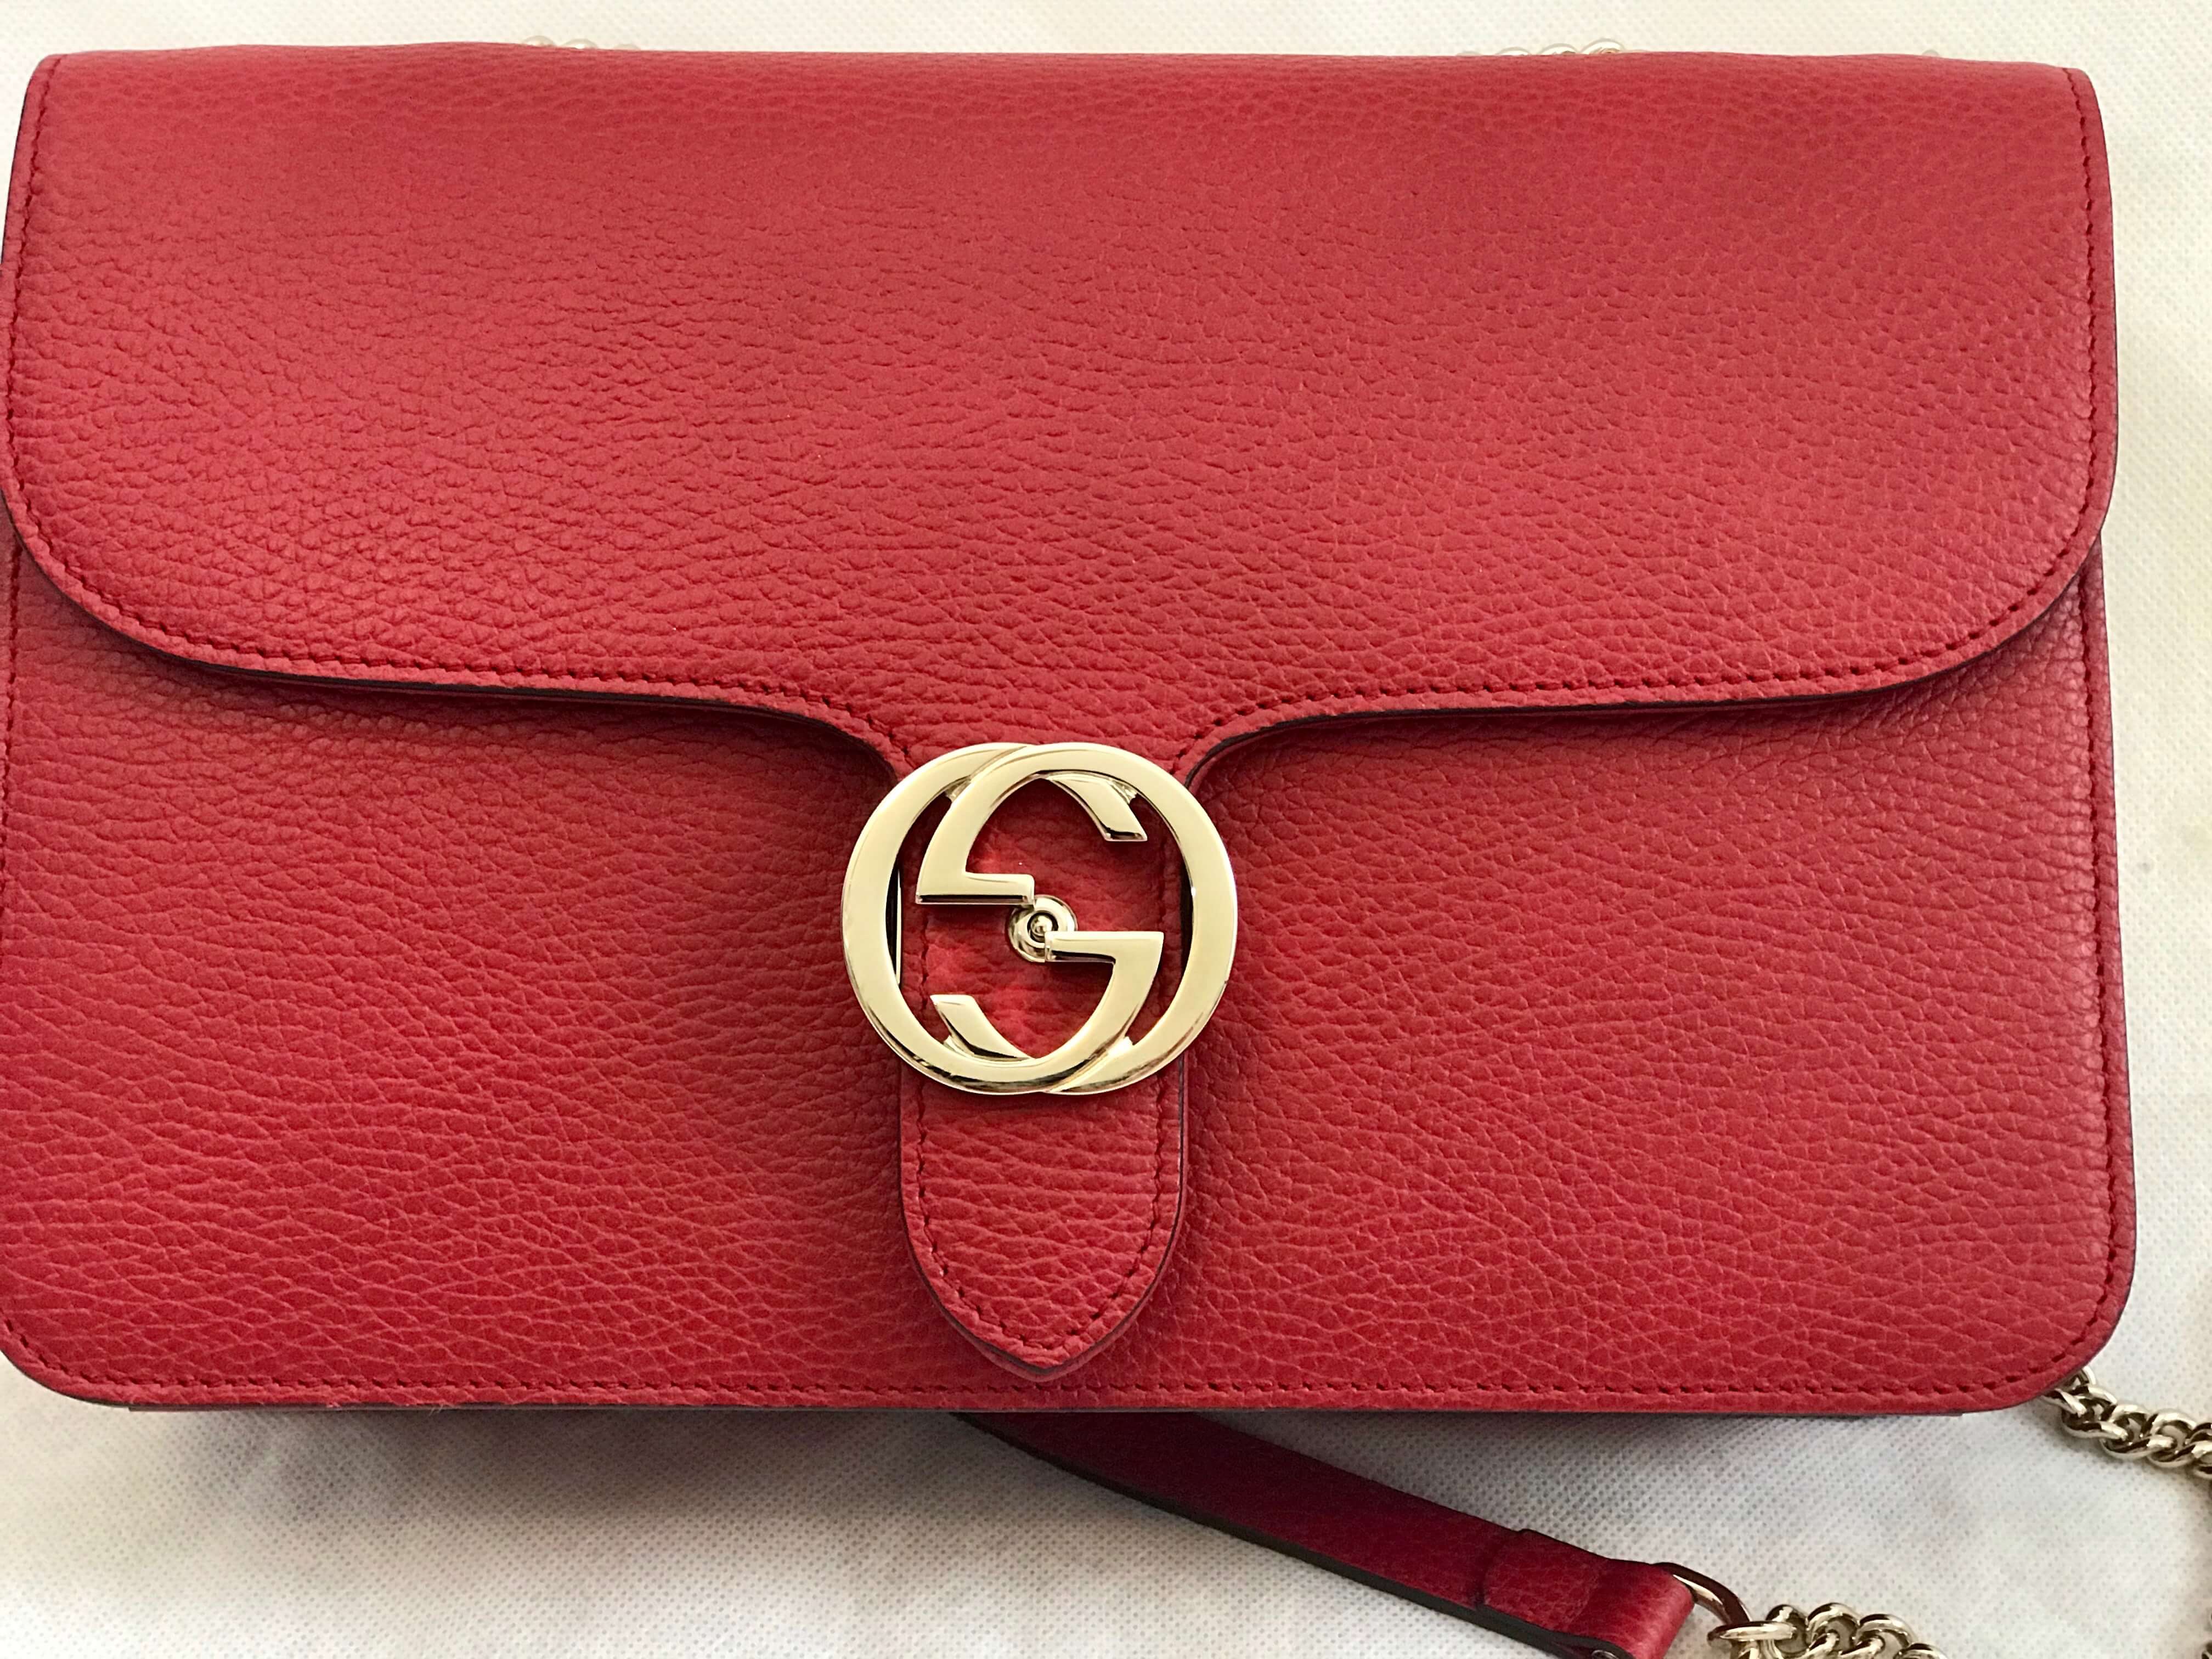 100% Authentic GUCCI RED Leather Shoulder Bag Style 510303 - Lowest ...